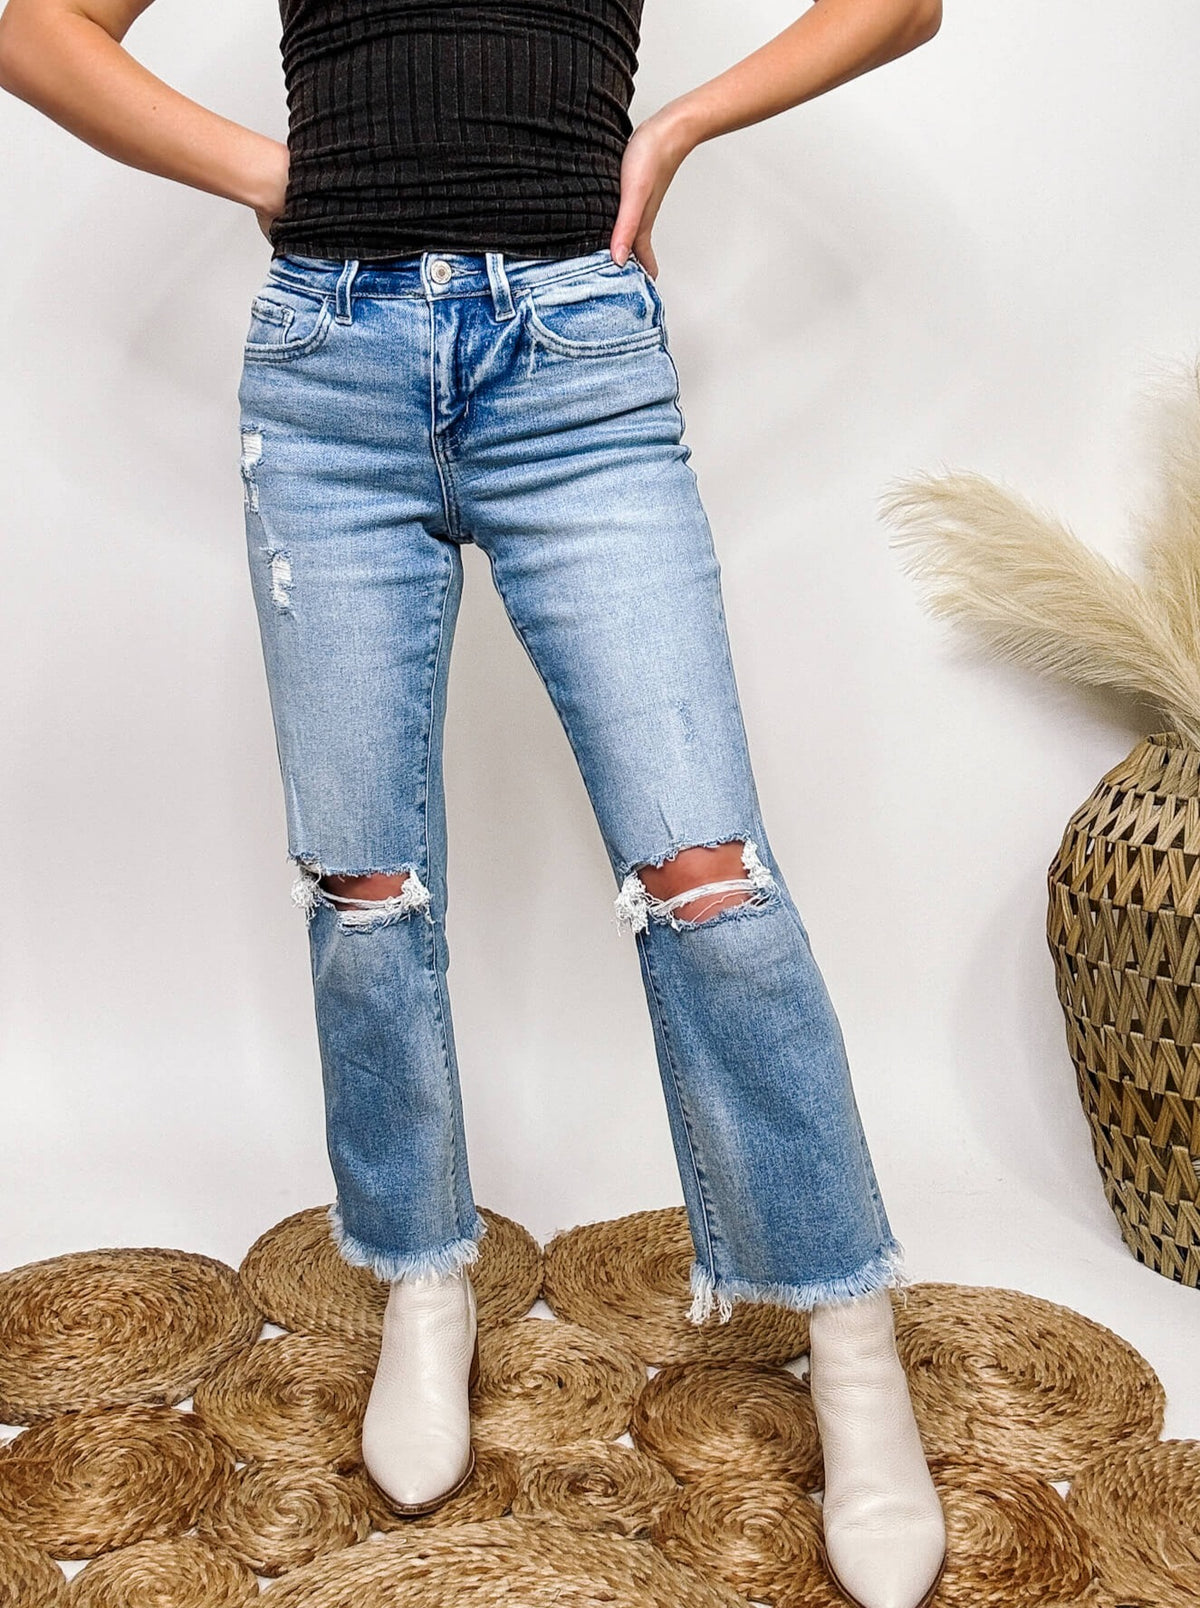 High Rise Cropped Flare Straight Leg Jeans Distressed with Frayed Hem Comfort Stretch Denim Vervet by Flying Monkey 93% Cotton, 5% Polyester, 2% Spandex 10" Rise, 26.5" Inseam